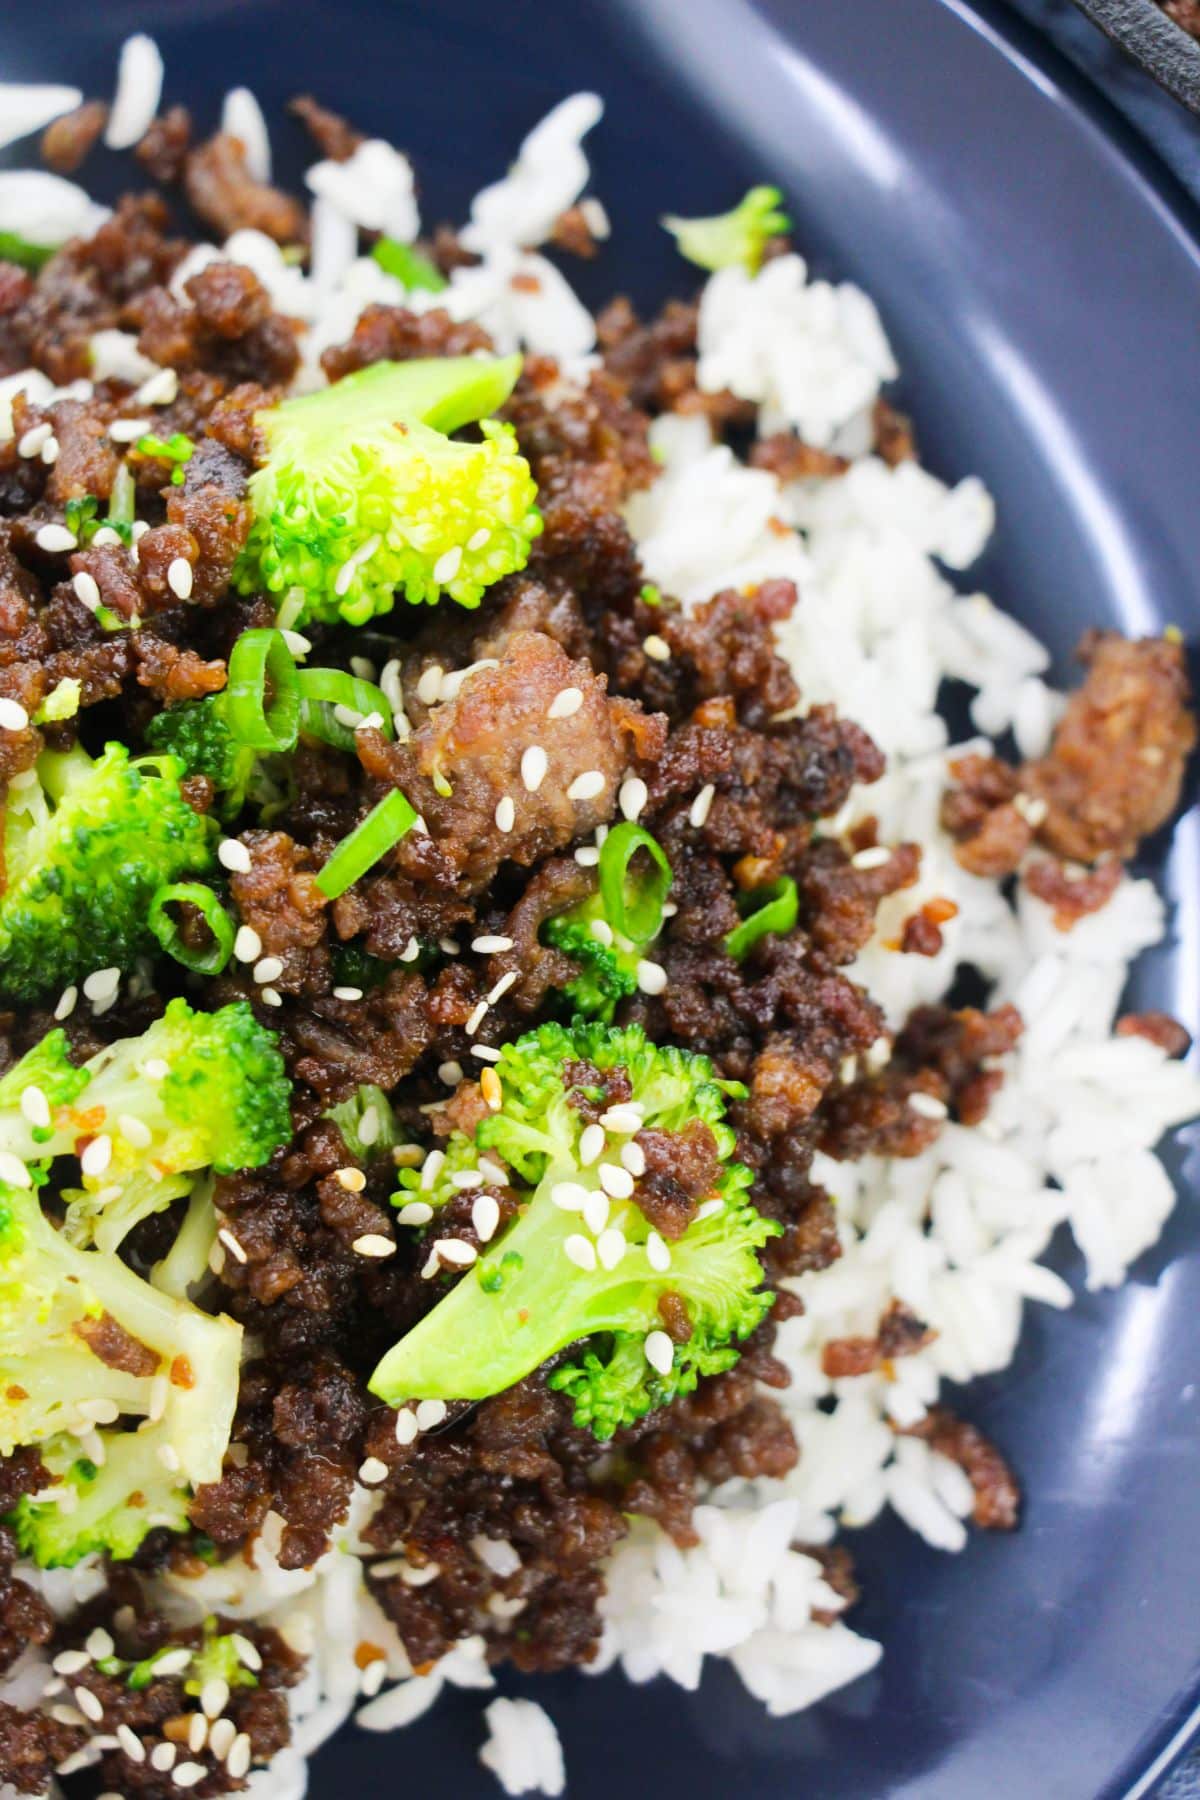 A close-up look of Korean Ground Beef and Broccoli on a serving plate, garnished with sesame seeds.